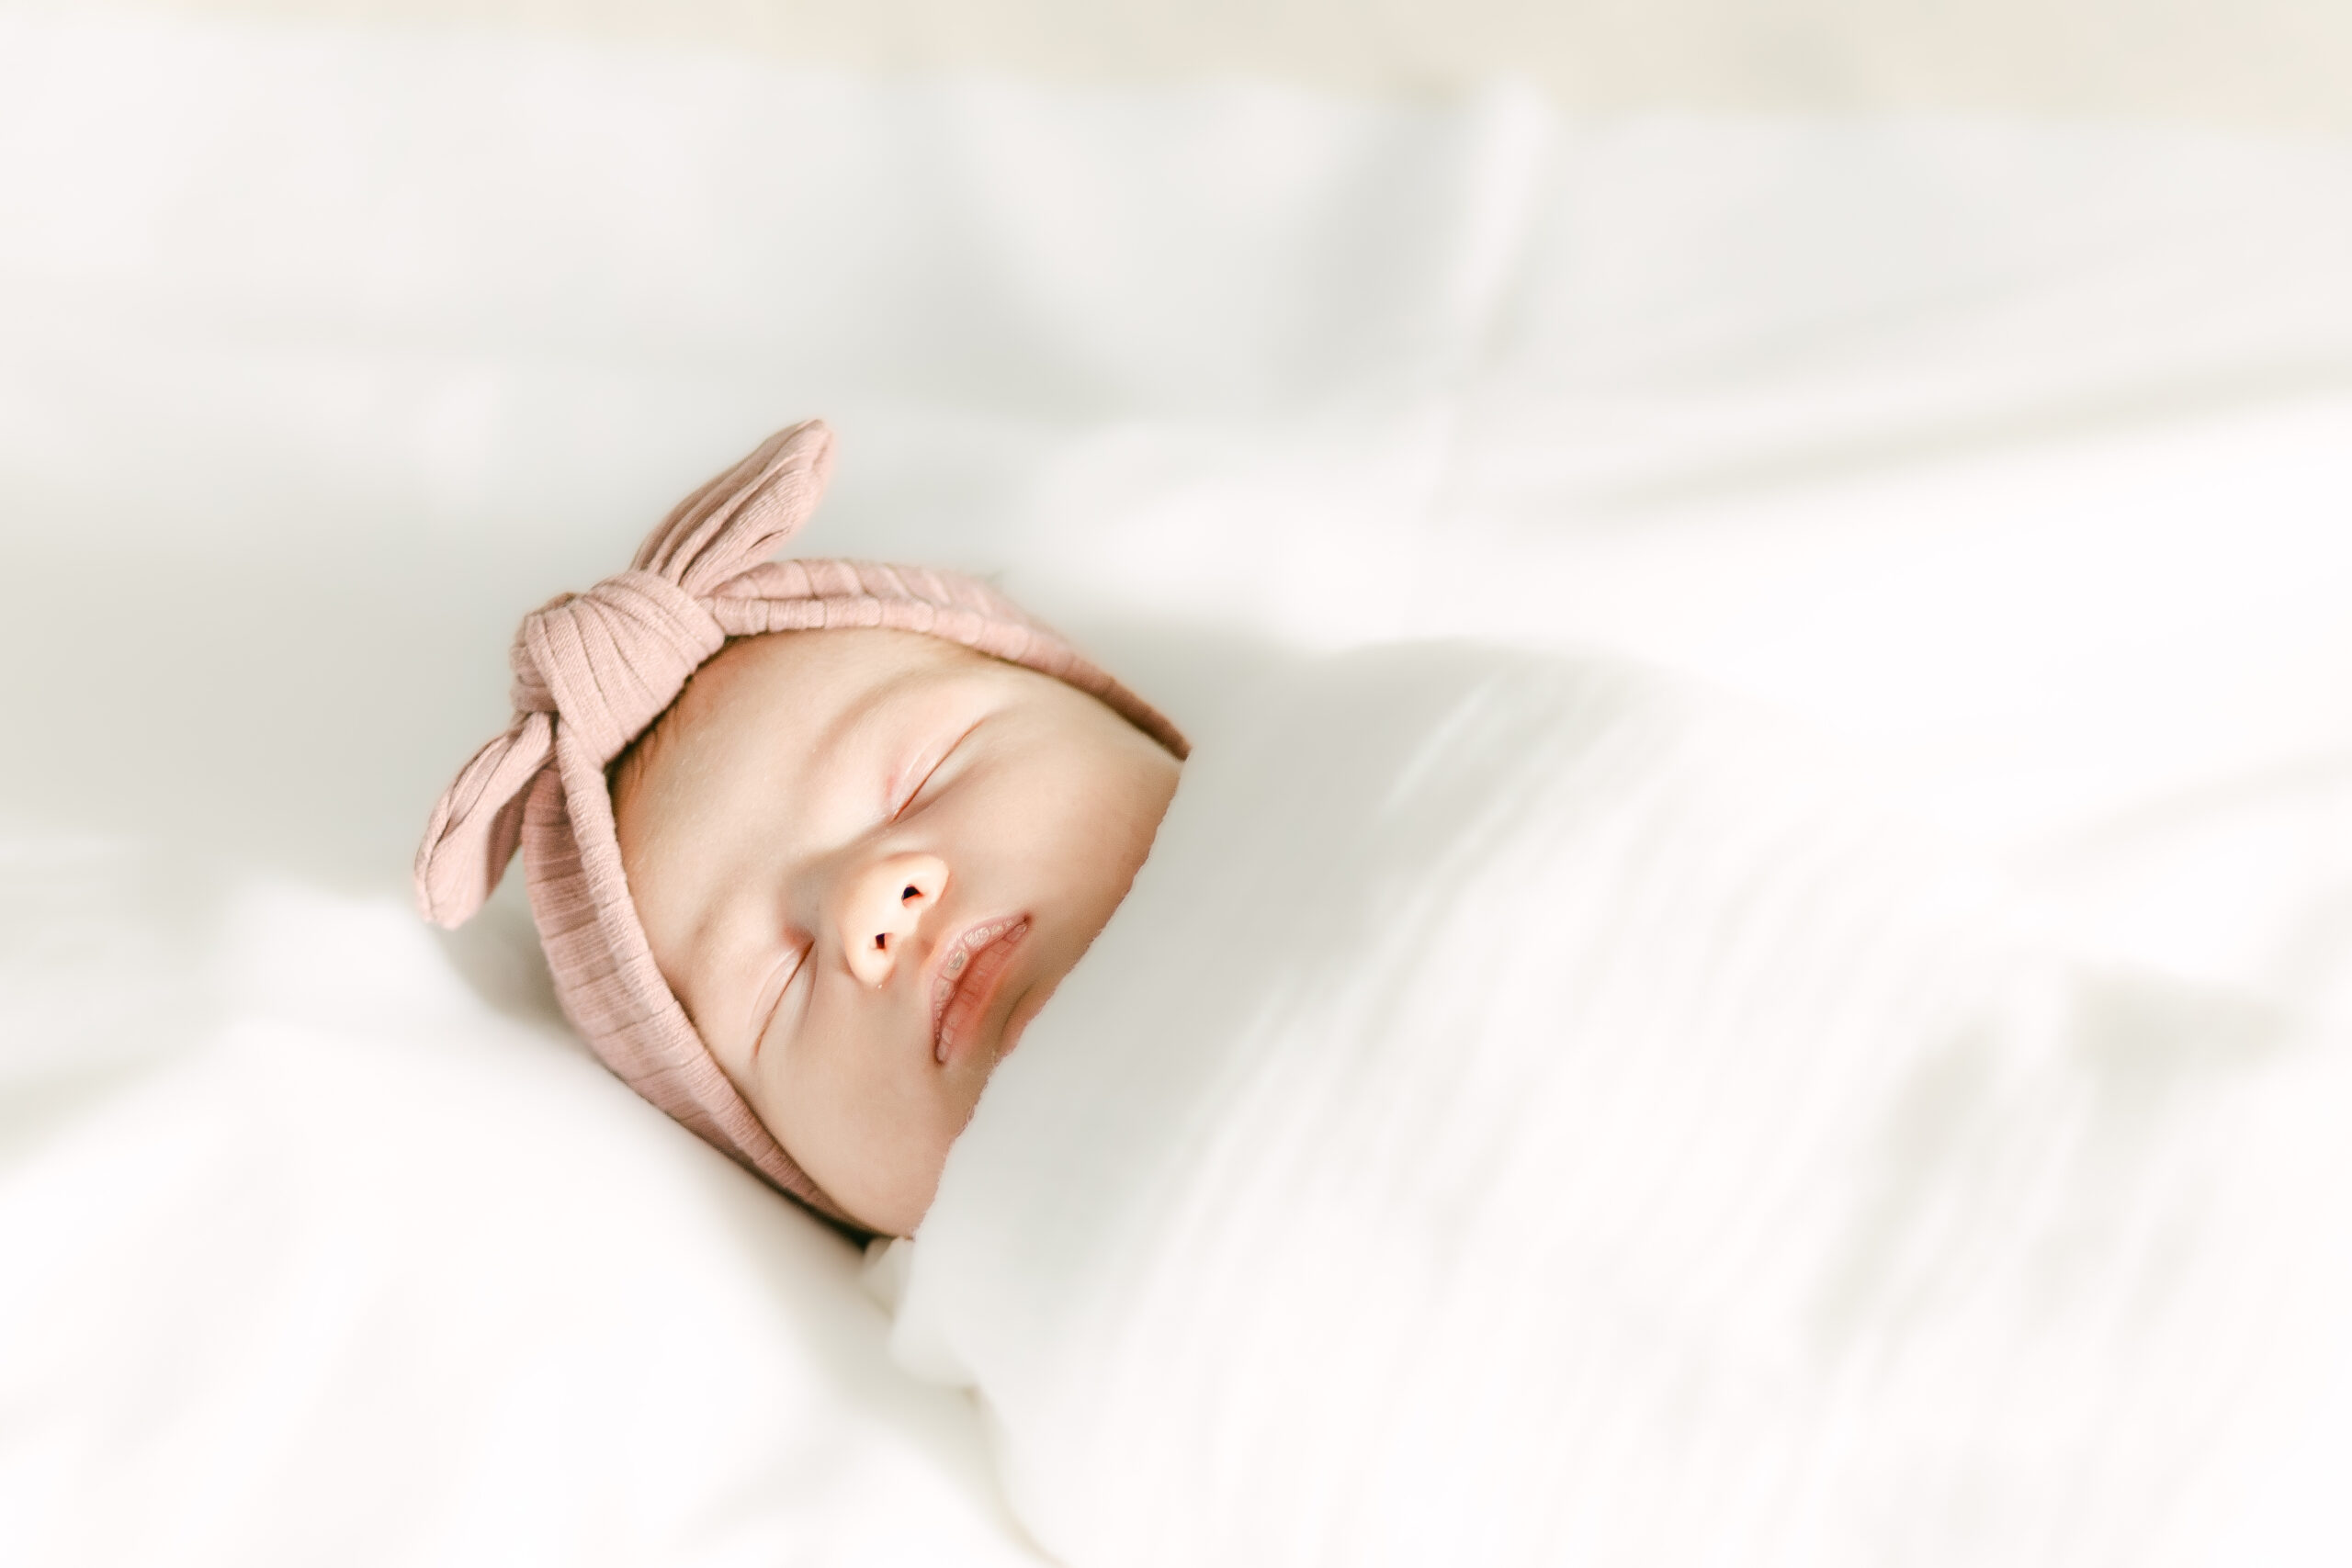 hire a dayton newborn photographer, questions to ask your photographer